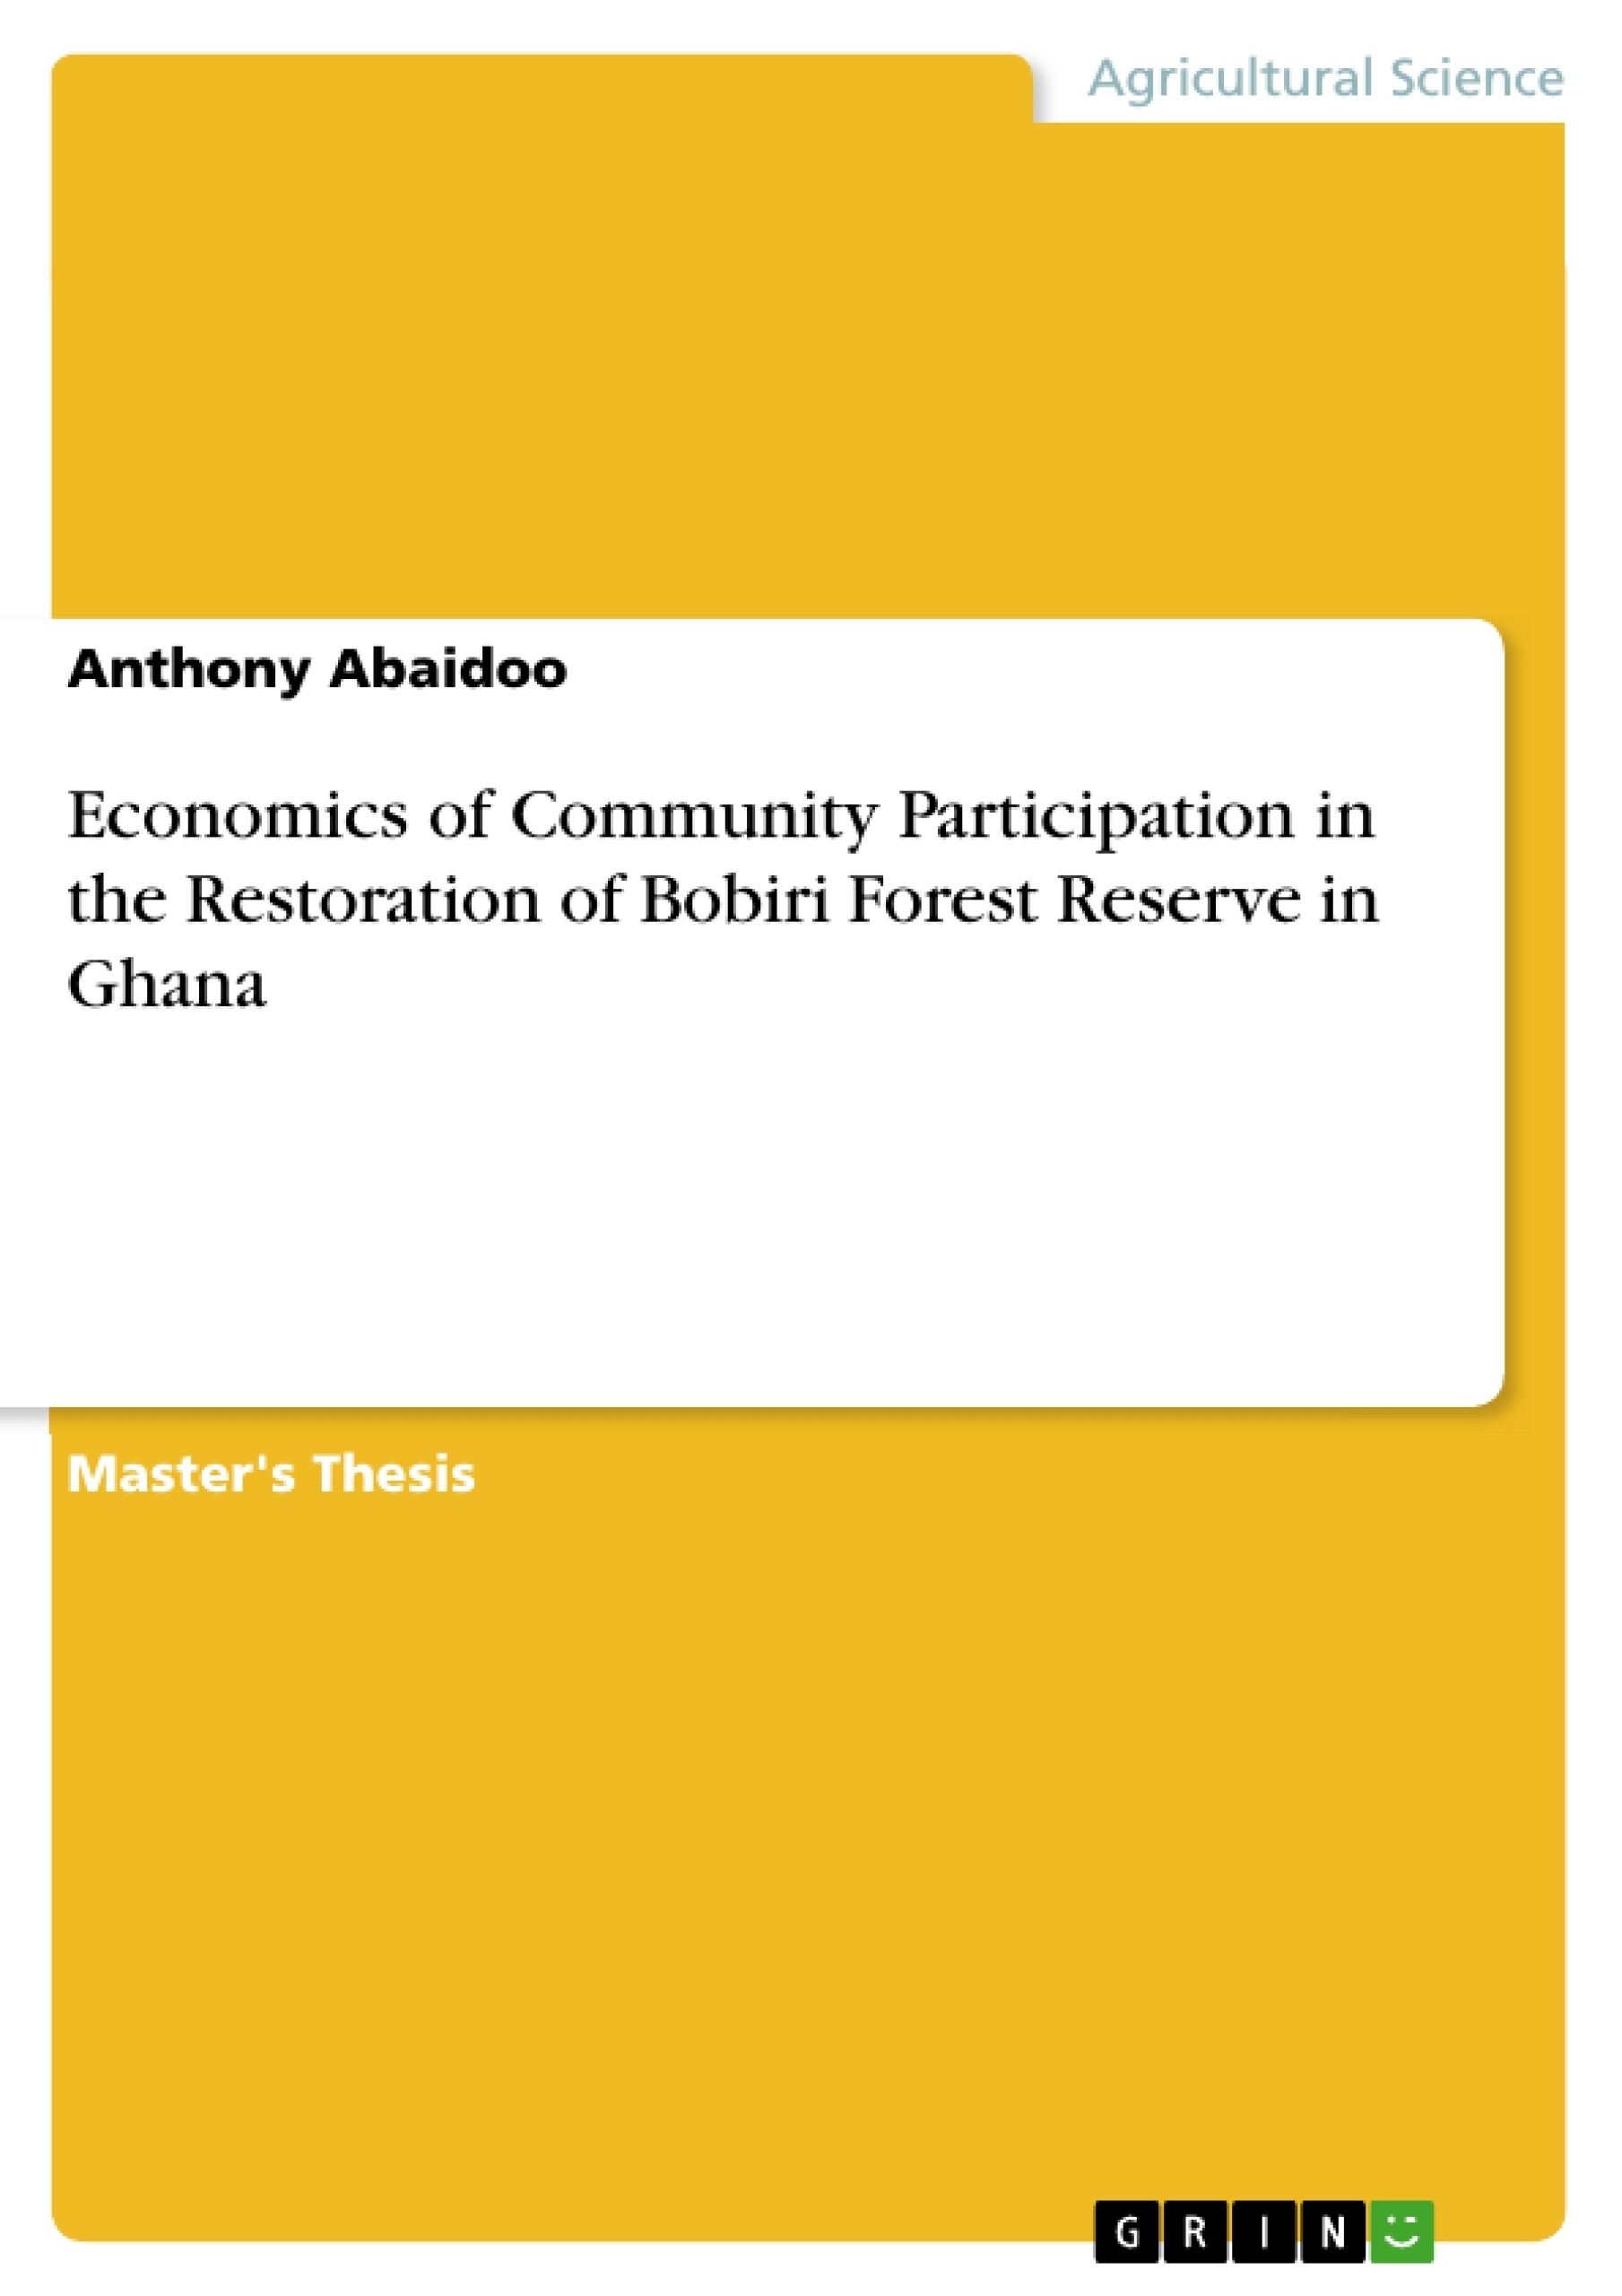 Título: Economics of Community Participation in the Restoration of Bobiri Forest Reserve in Ghana